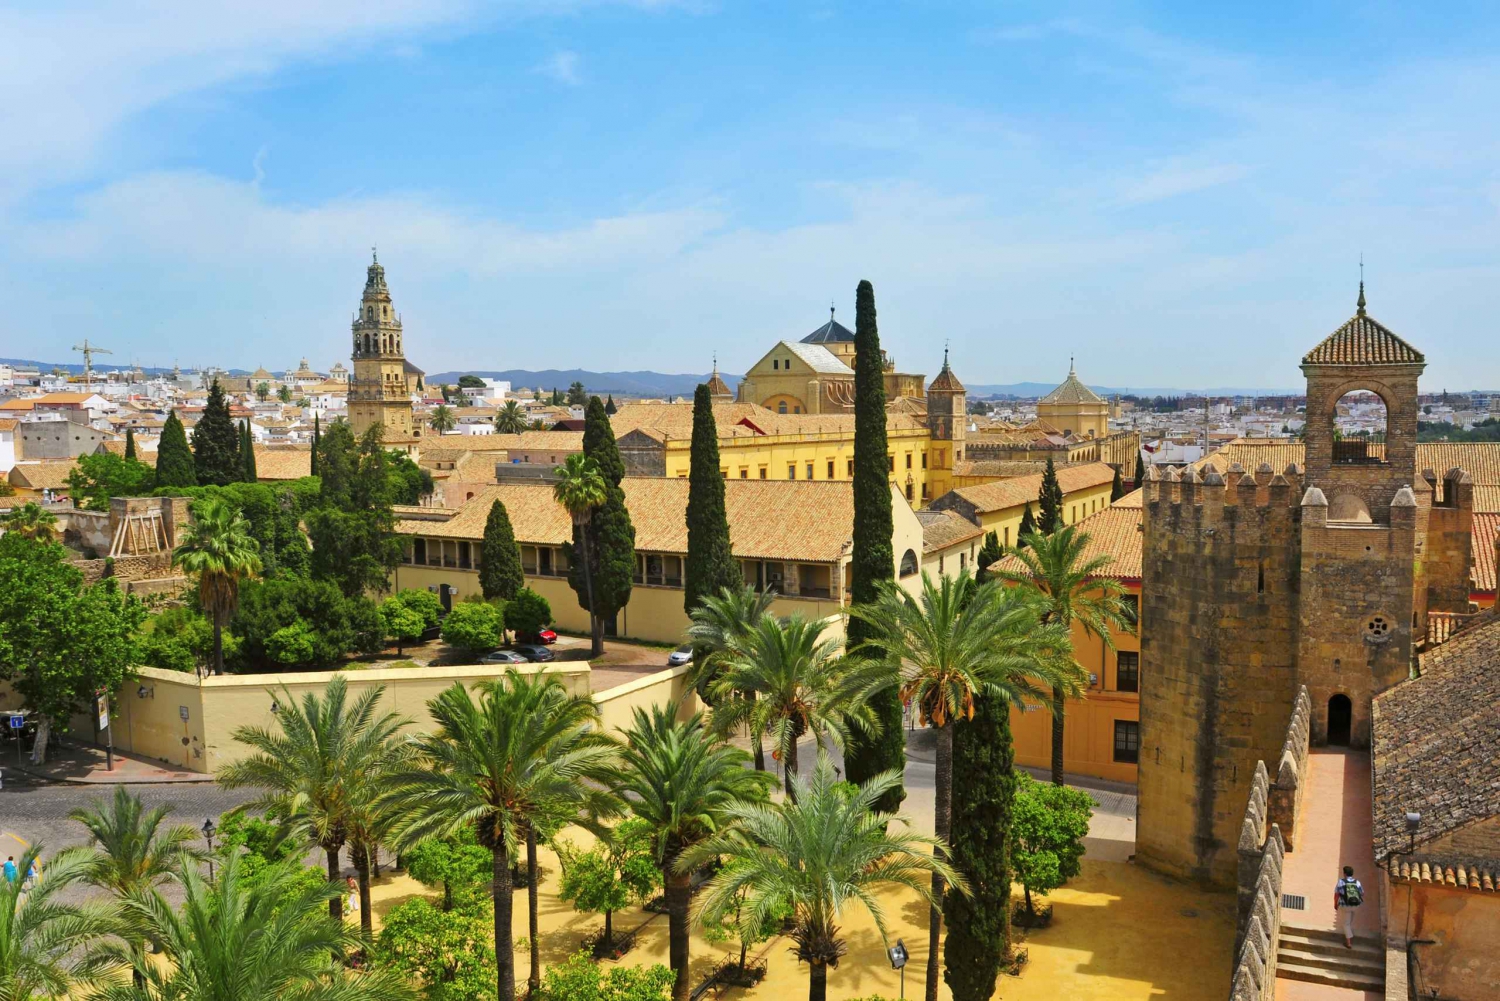 Alcazar of Cordoba Entry Ticket and Guided Tour